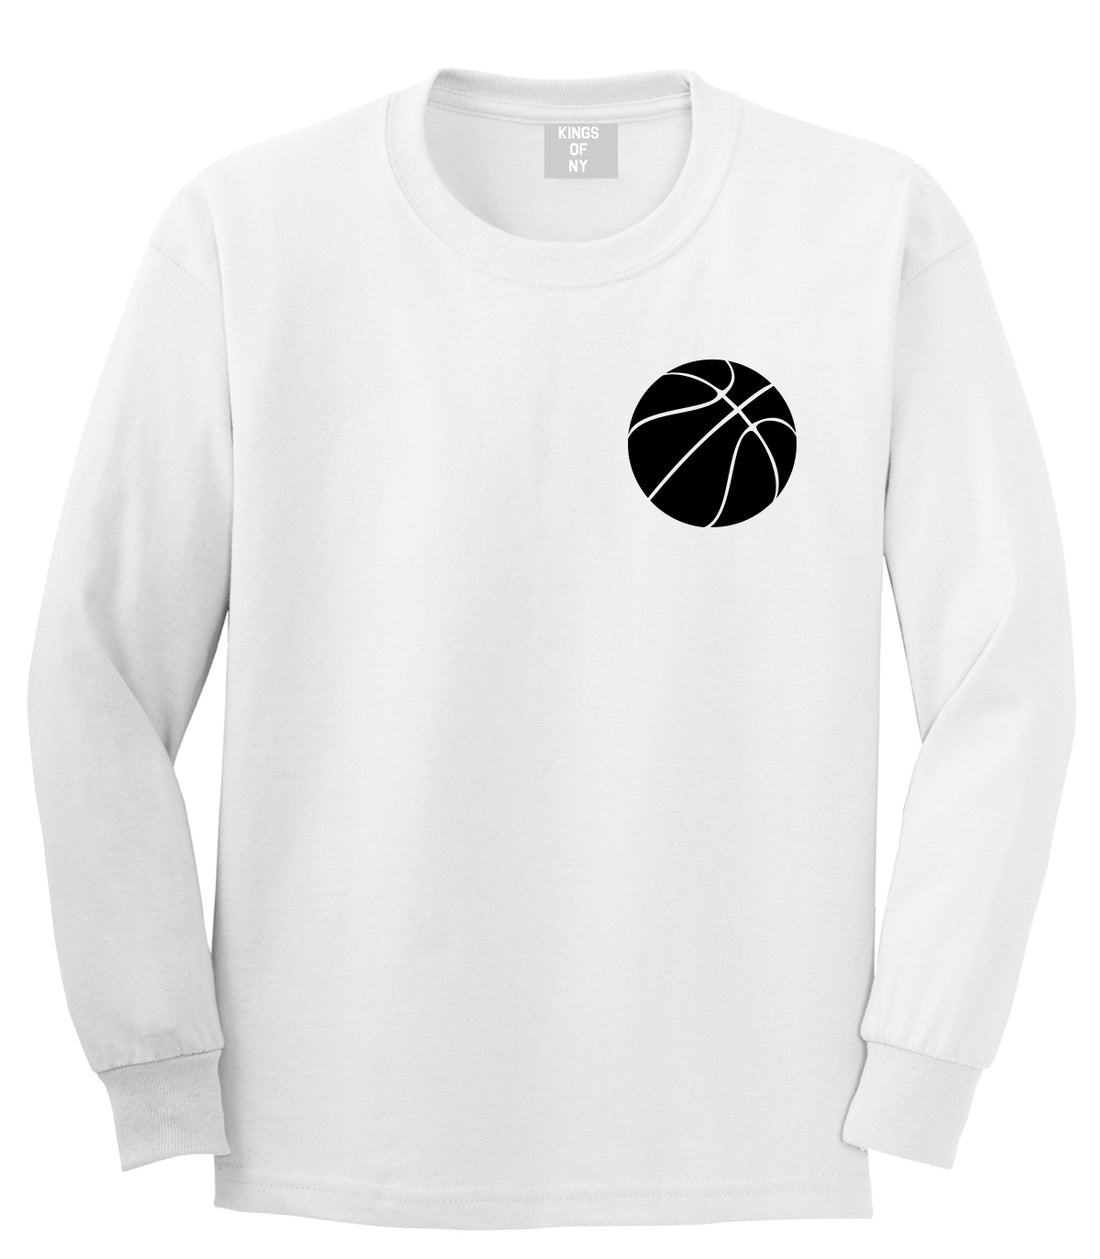 Basketball Logo Chest White Long Sleeve T-Shirt by Kings Of NY